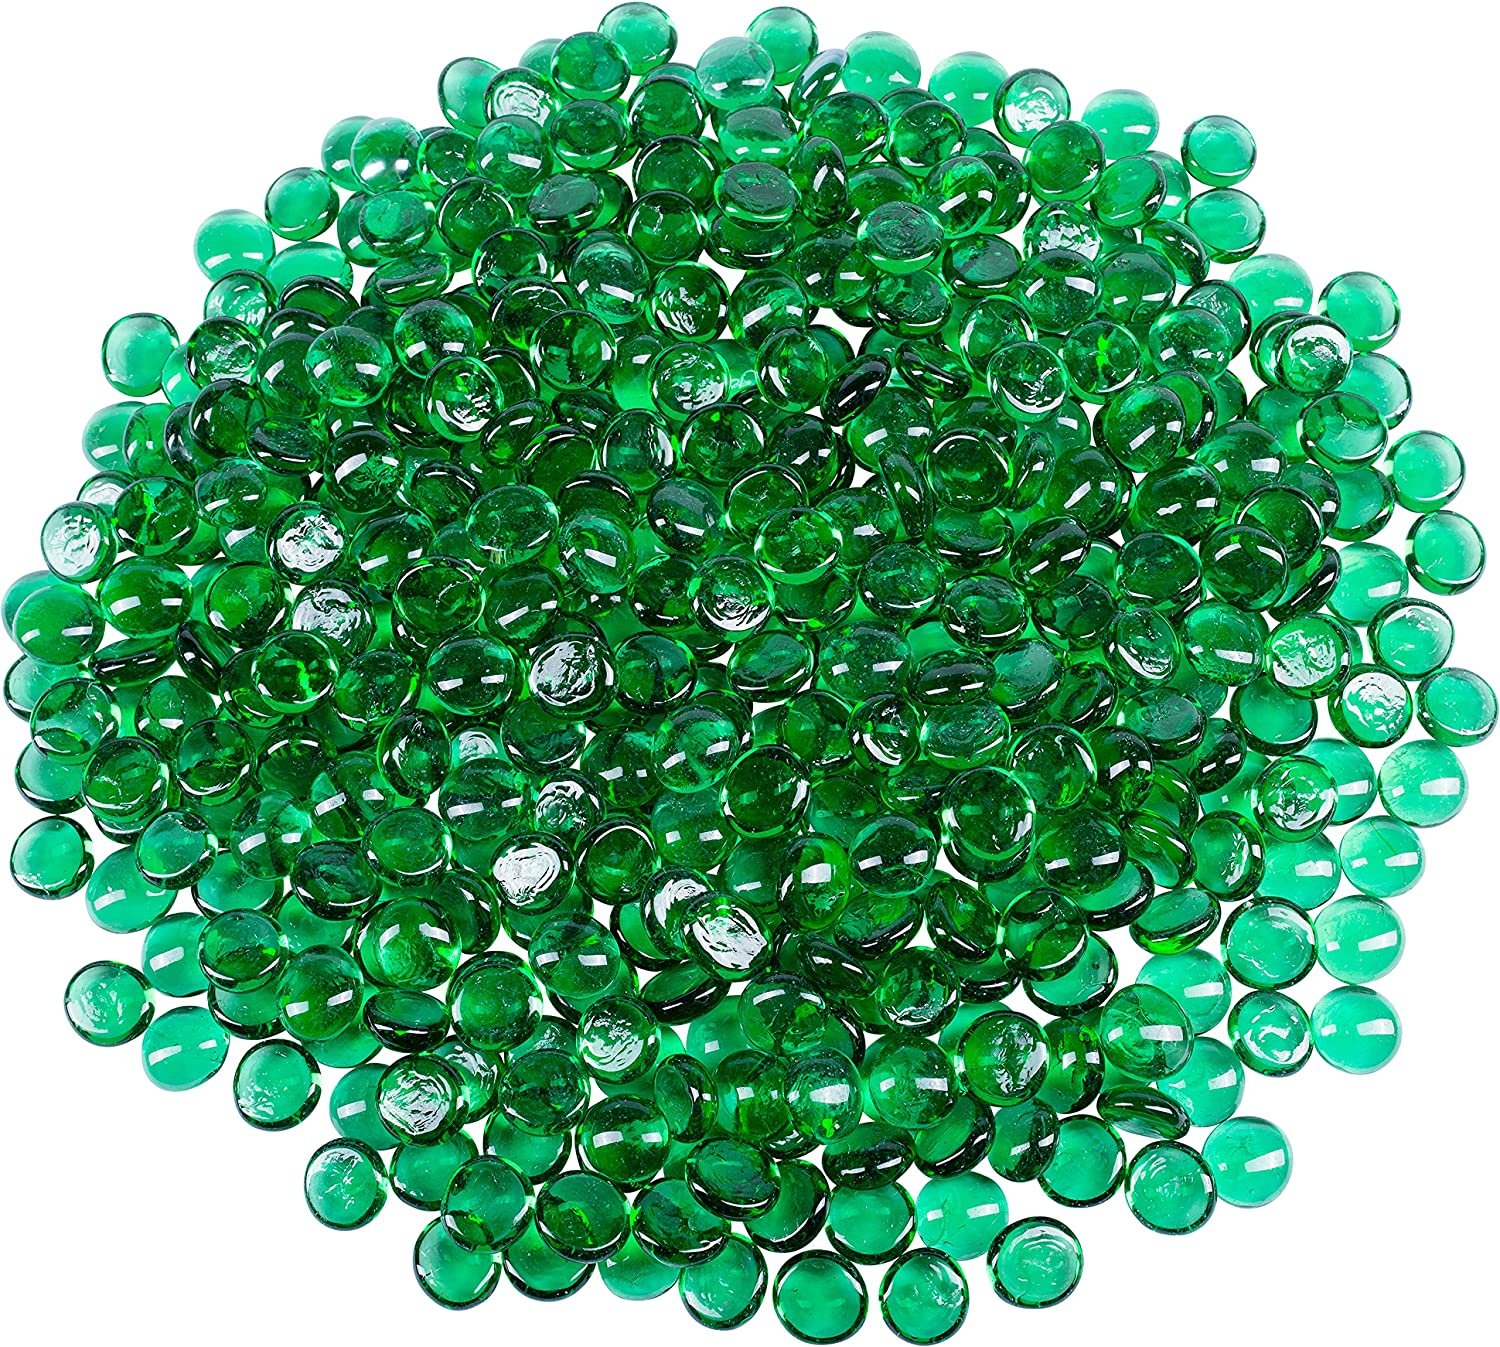 Galashield Green Flat Glass Marbles for Vases Glass Gems Beads Pebbles Vase Filler 5 LBS, Approx. 450 PCS - image 1 of 6